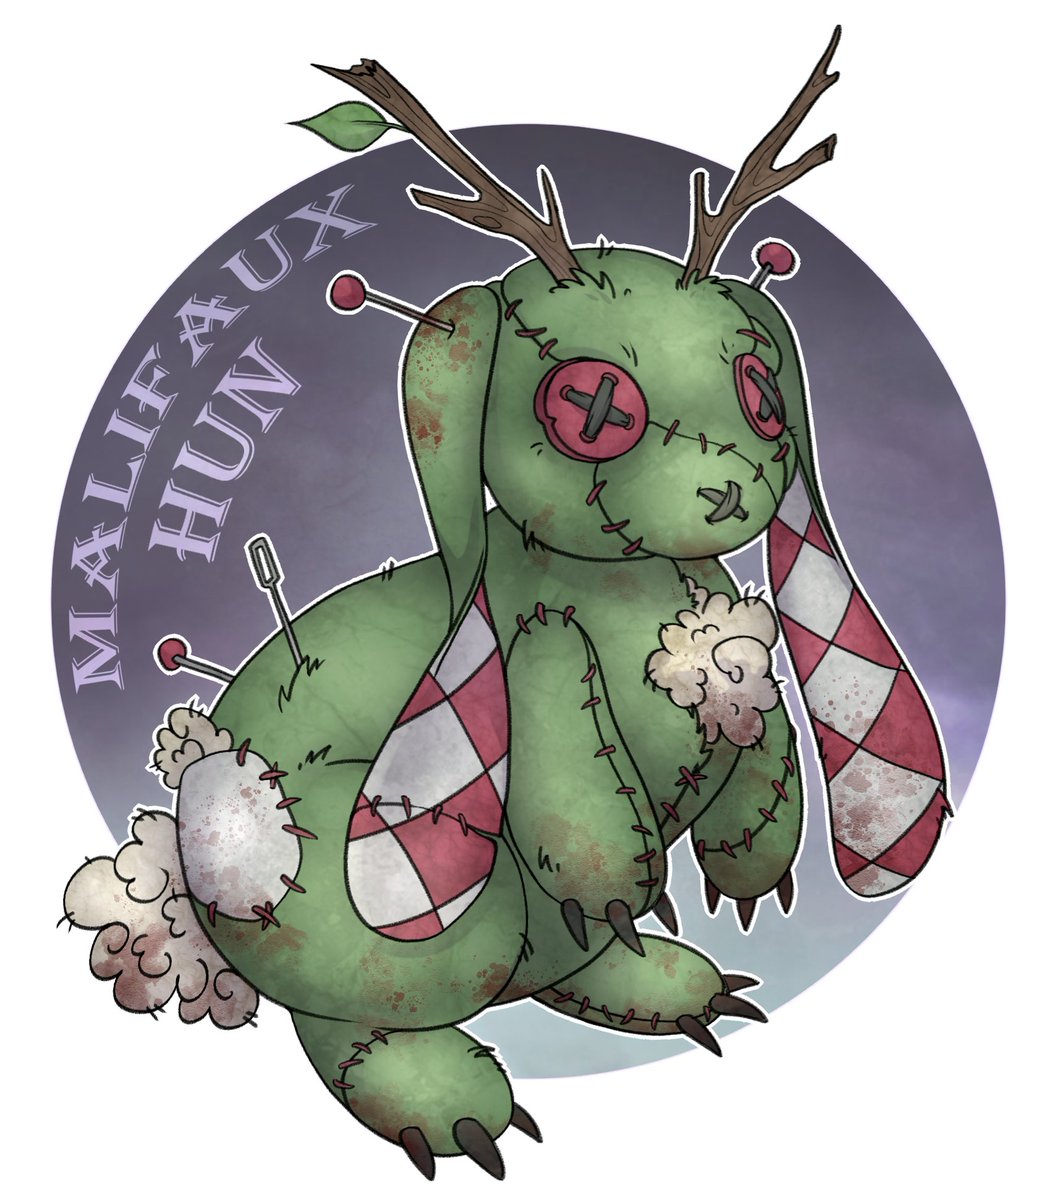 Checkered-eared Jackalope

This mascot was designed for the Hungarian Malifaux club. We put together a famous, retro Hungarian cartoon character, the checkered-eared (plush) rabbit, and Jackalope form Malifaux.

#malifaux #wyrdgames  #playwyrd #jackalope #voodoo #rabbit #puppet